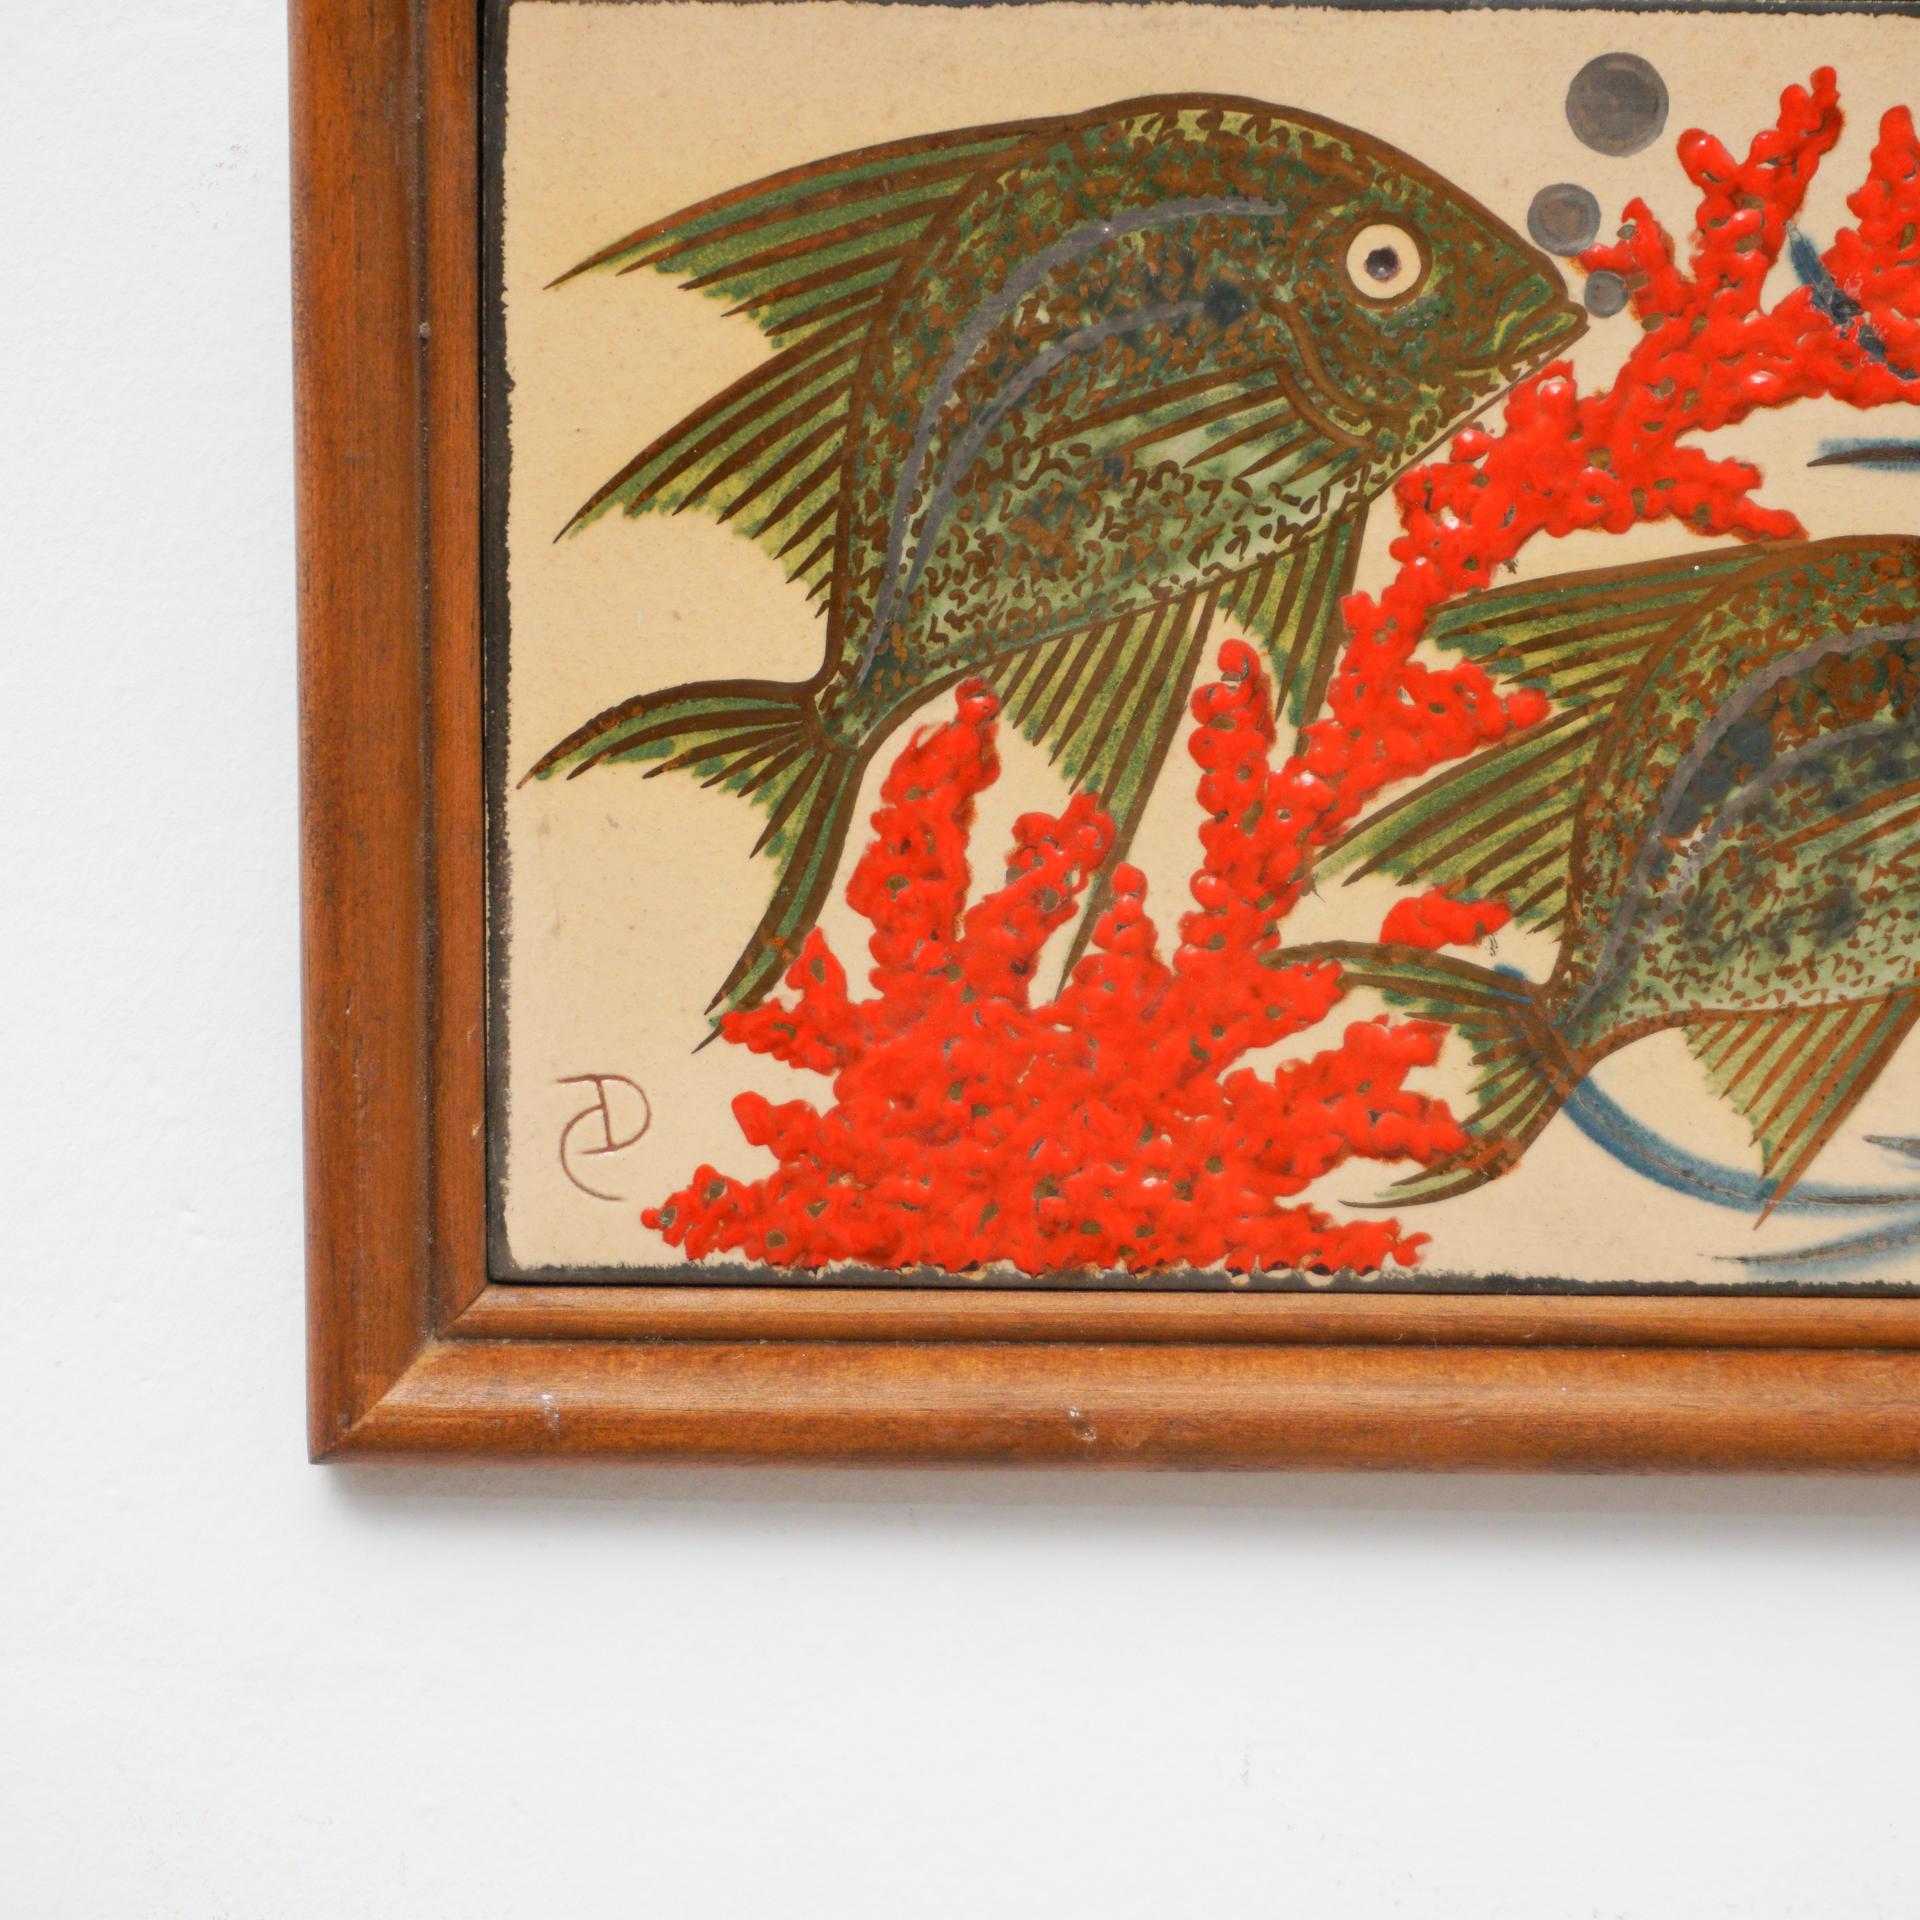 Ceramic hand painted artwork by Catalan artist Diaz Costa, circa 1960.
Framed. Signed.

In original condition, with minor wear consistent of age and use, preserving a beautiul patina.